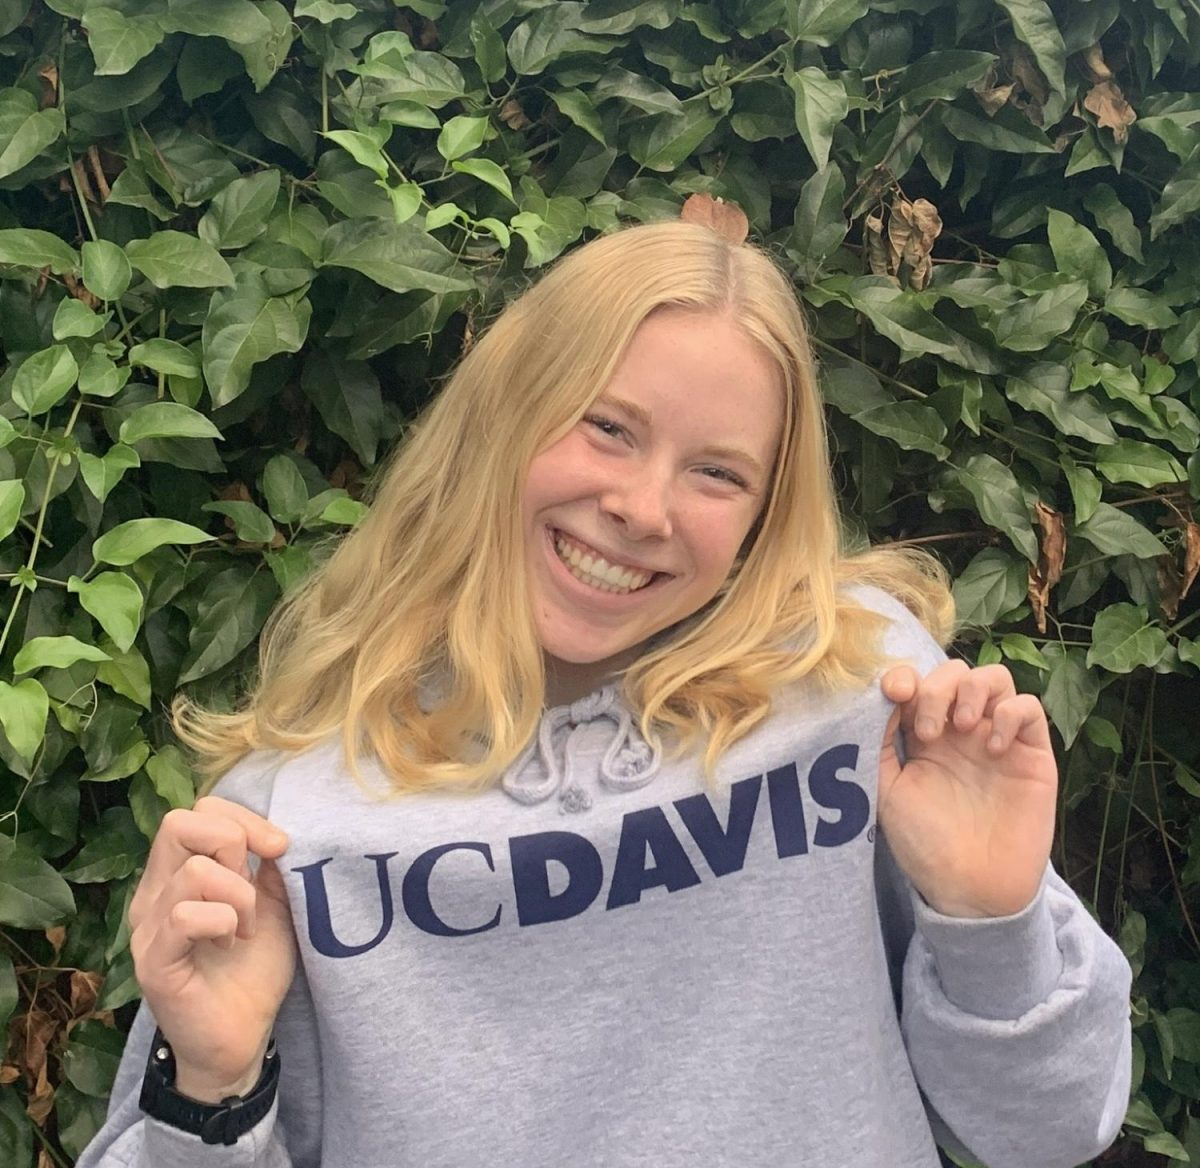 This+November%2C+senior+Maddy+Randall+committed+to+Division+I+cross+country+and+track+at+the+University+of+California%2C+Davis.+For+the+past+couple+of+years%2C+Maddy+has+contributed+to+the+varsity+girls+cross+country+teams+success+at+CCS+and+state+championships.+